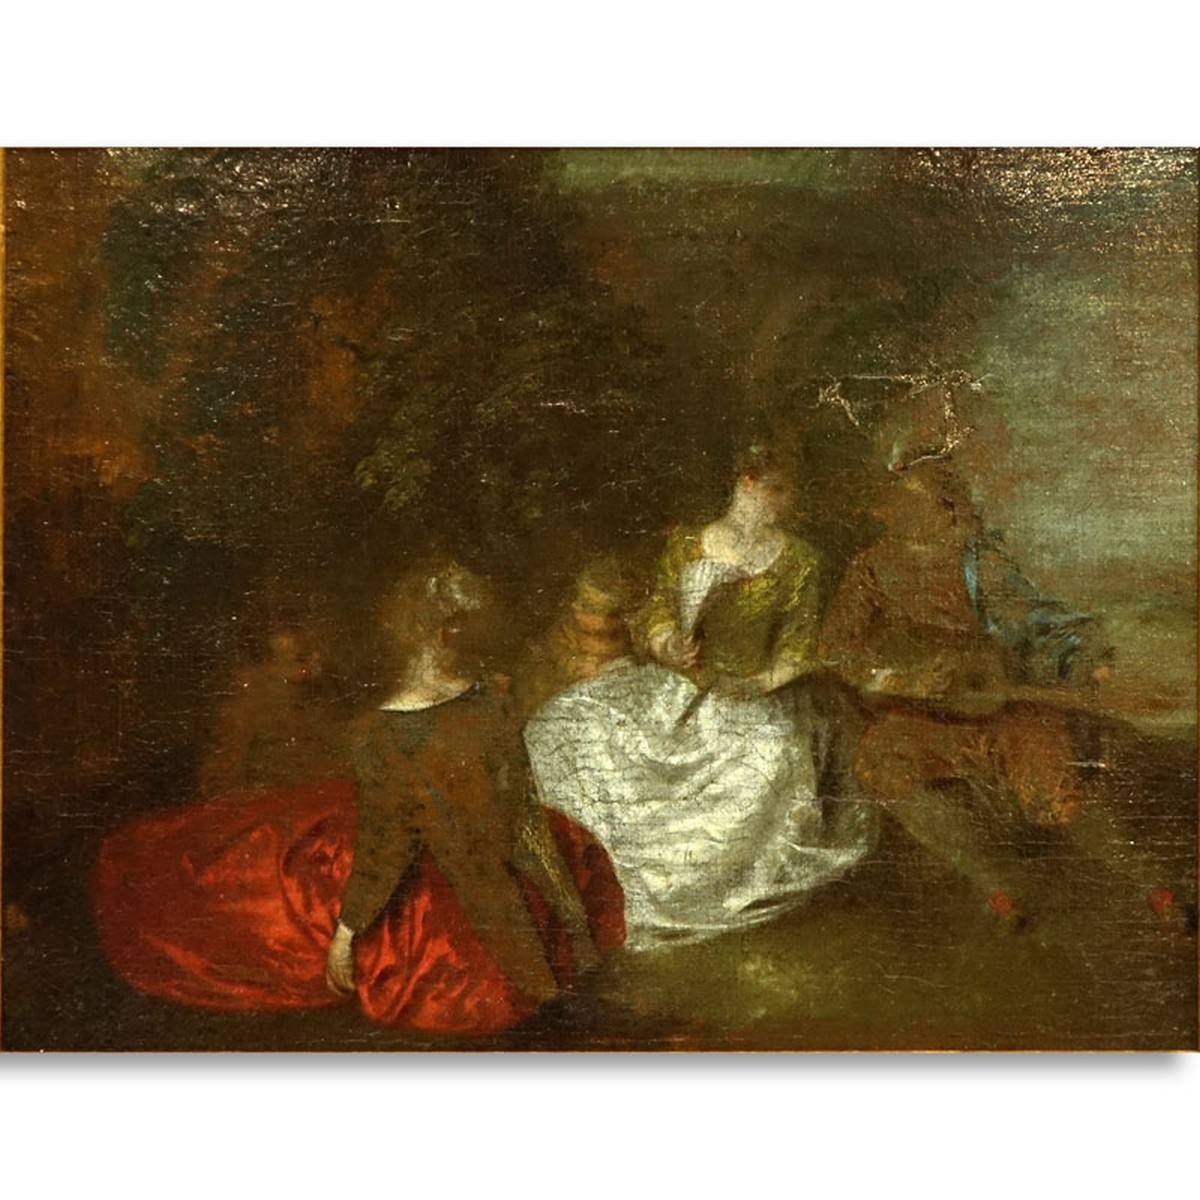 Attributed to: Antoine Watteau, French (1684 - 1721) Oil on Relined Canvas Conserved on Wood Panel "Fete Champetre", Artist name and date inscribed on plaque affixed to frame. Label attached en verso, inscribed "Watteau" on obverse side of the canvas.